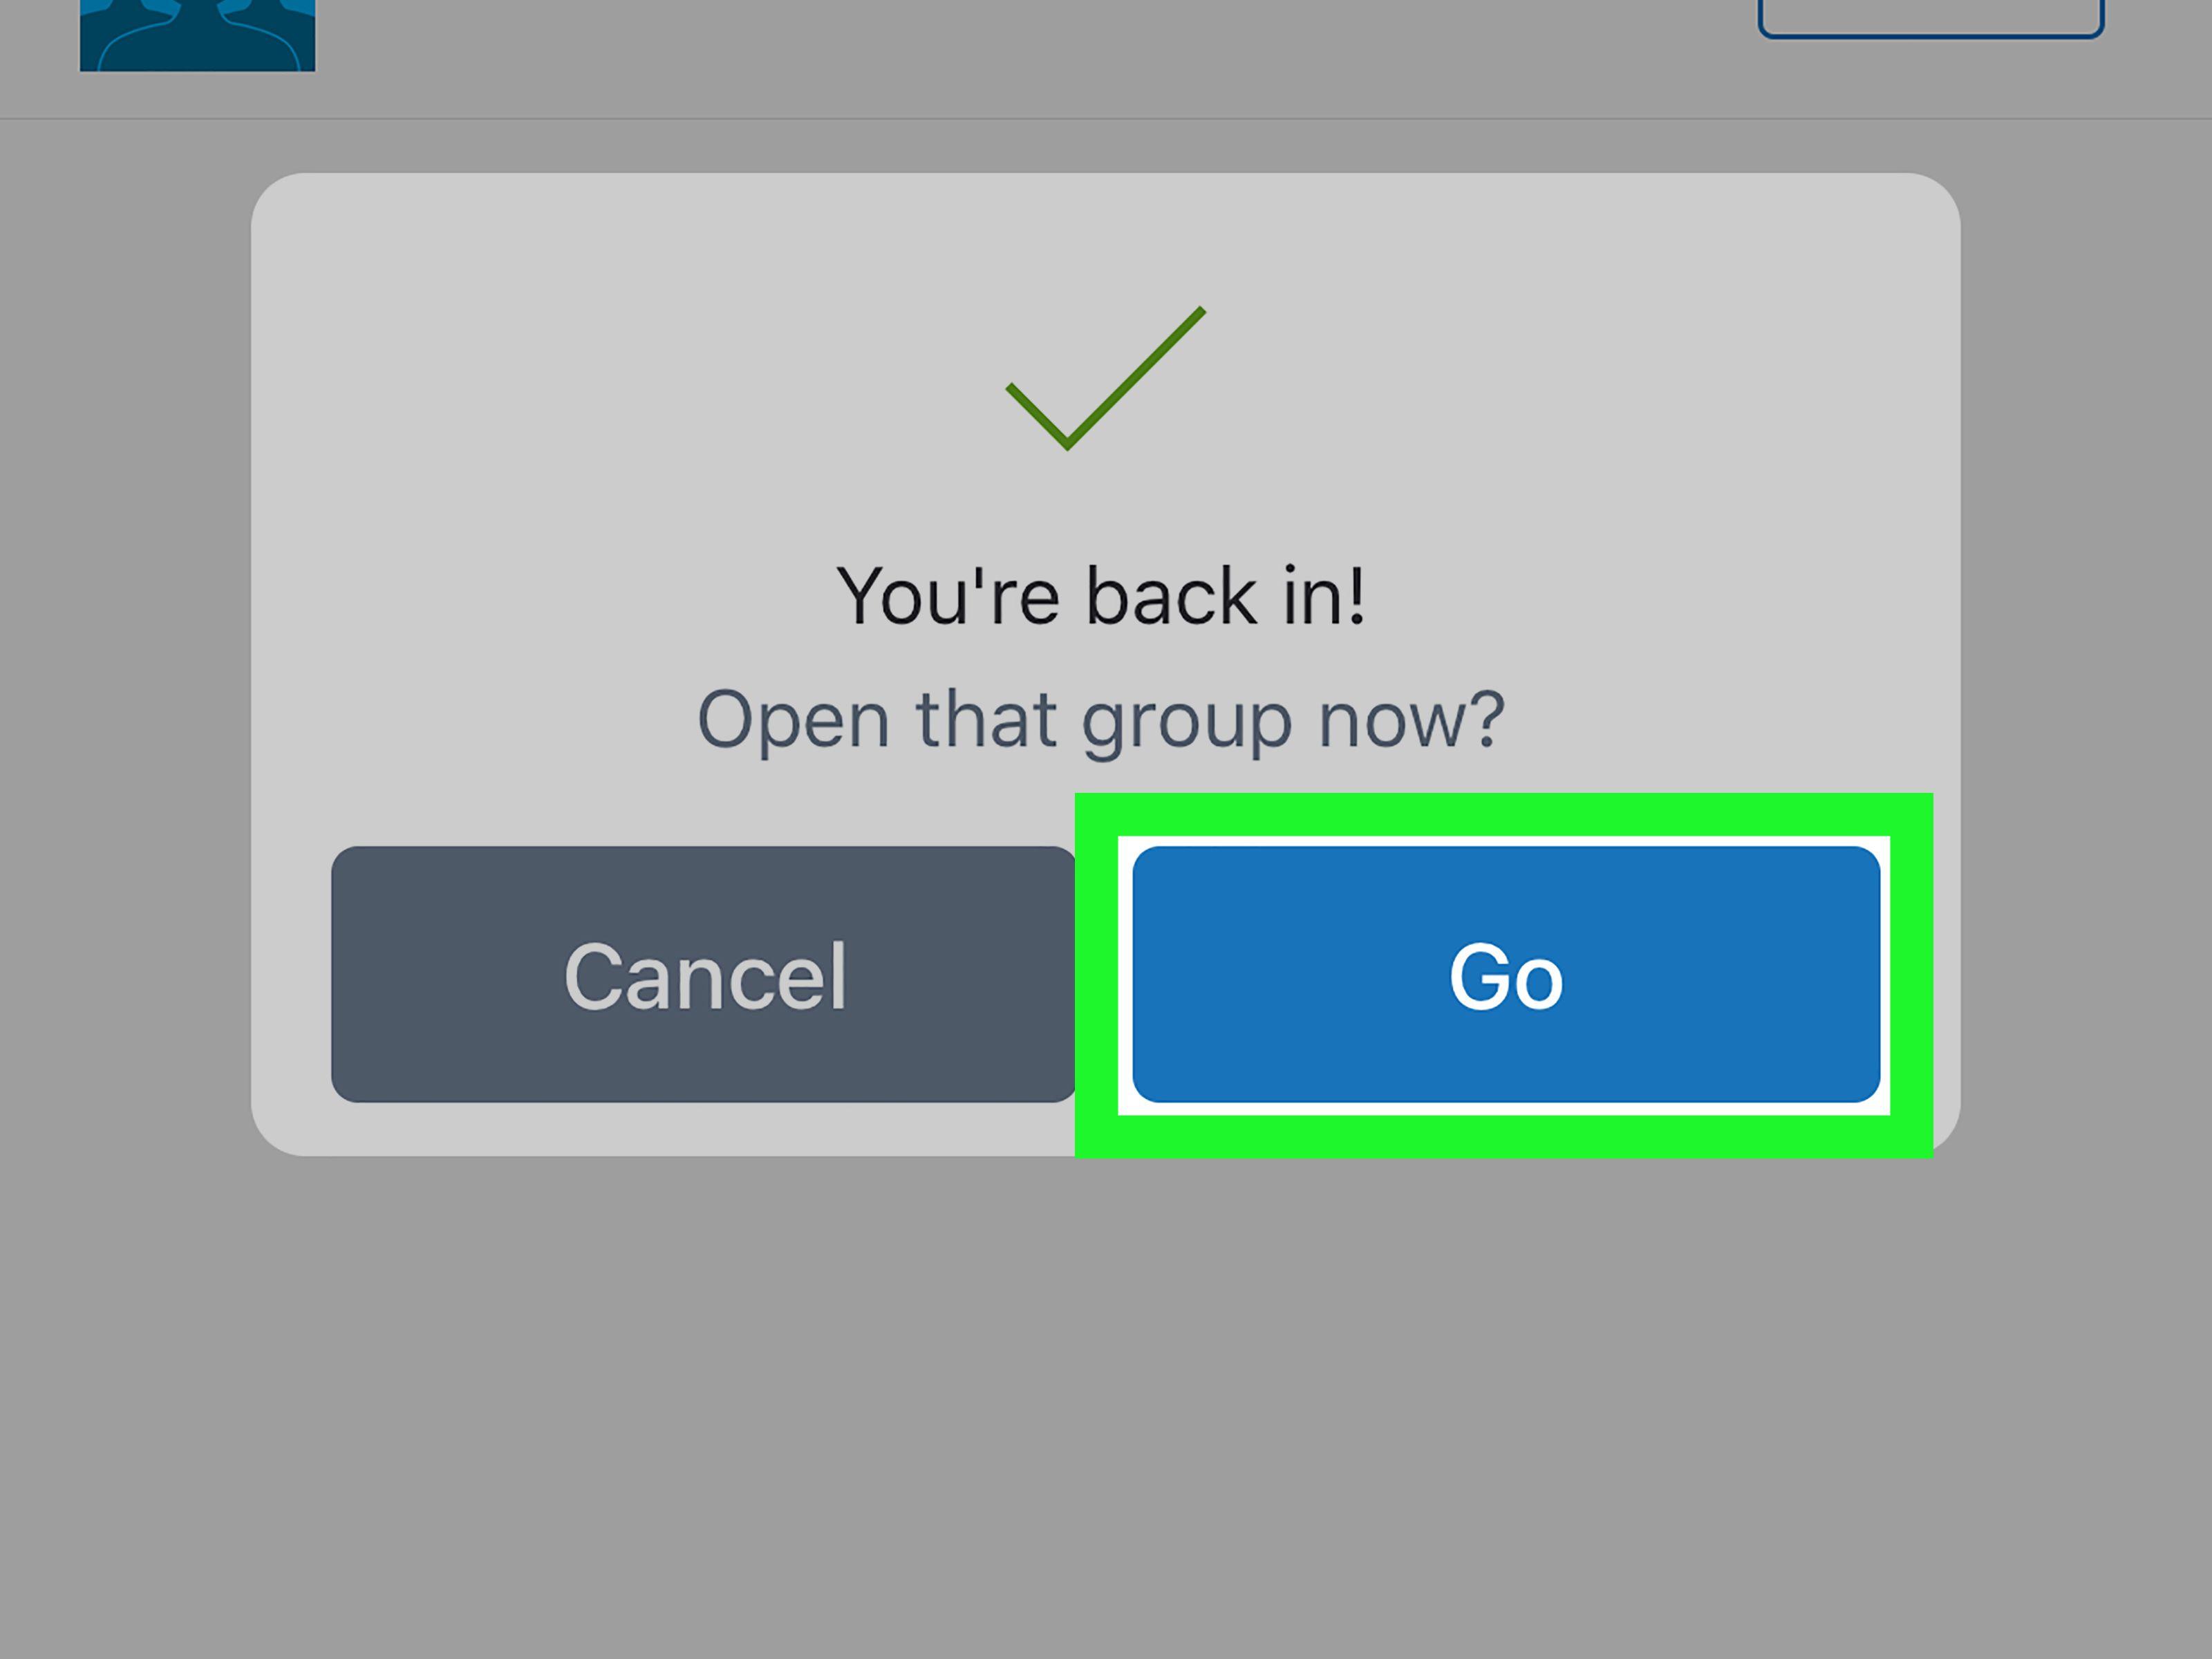 GroupMe Logo - How to Rejoin Group on Groupme on iPhone or iPad: 7 Steps